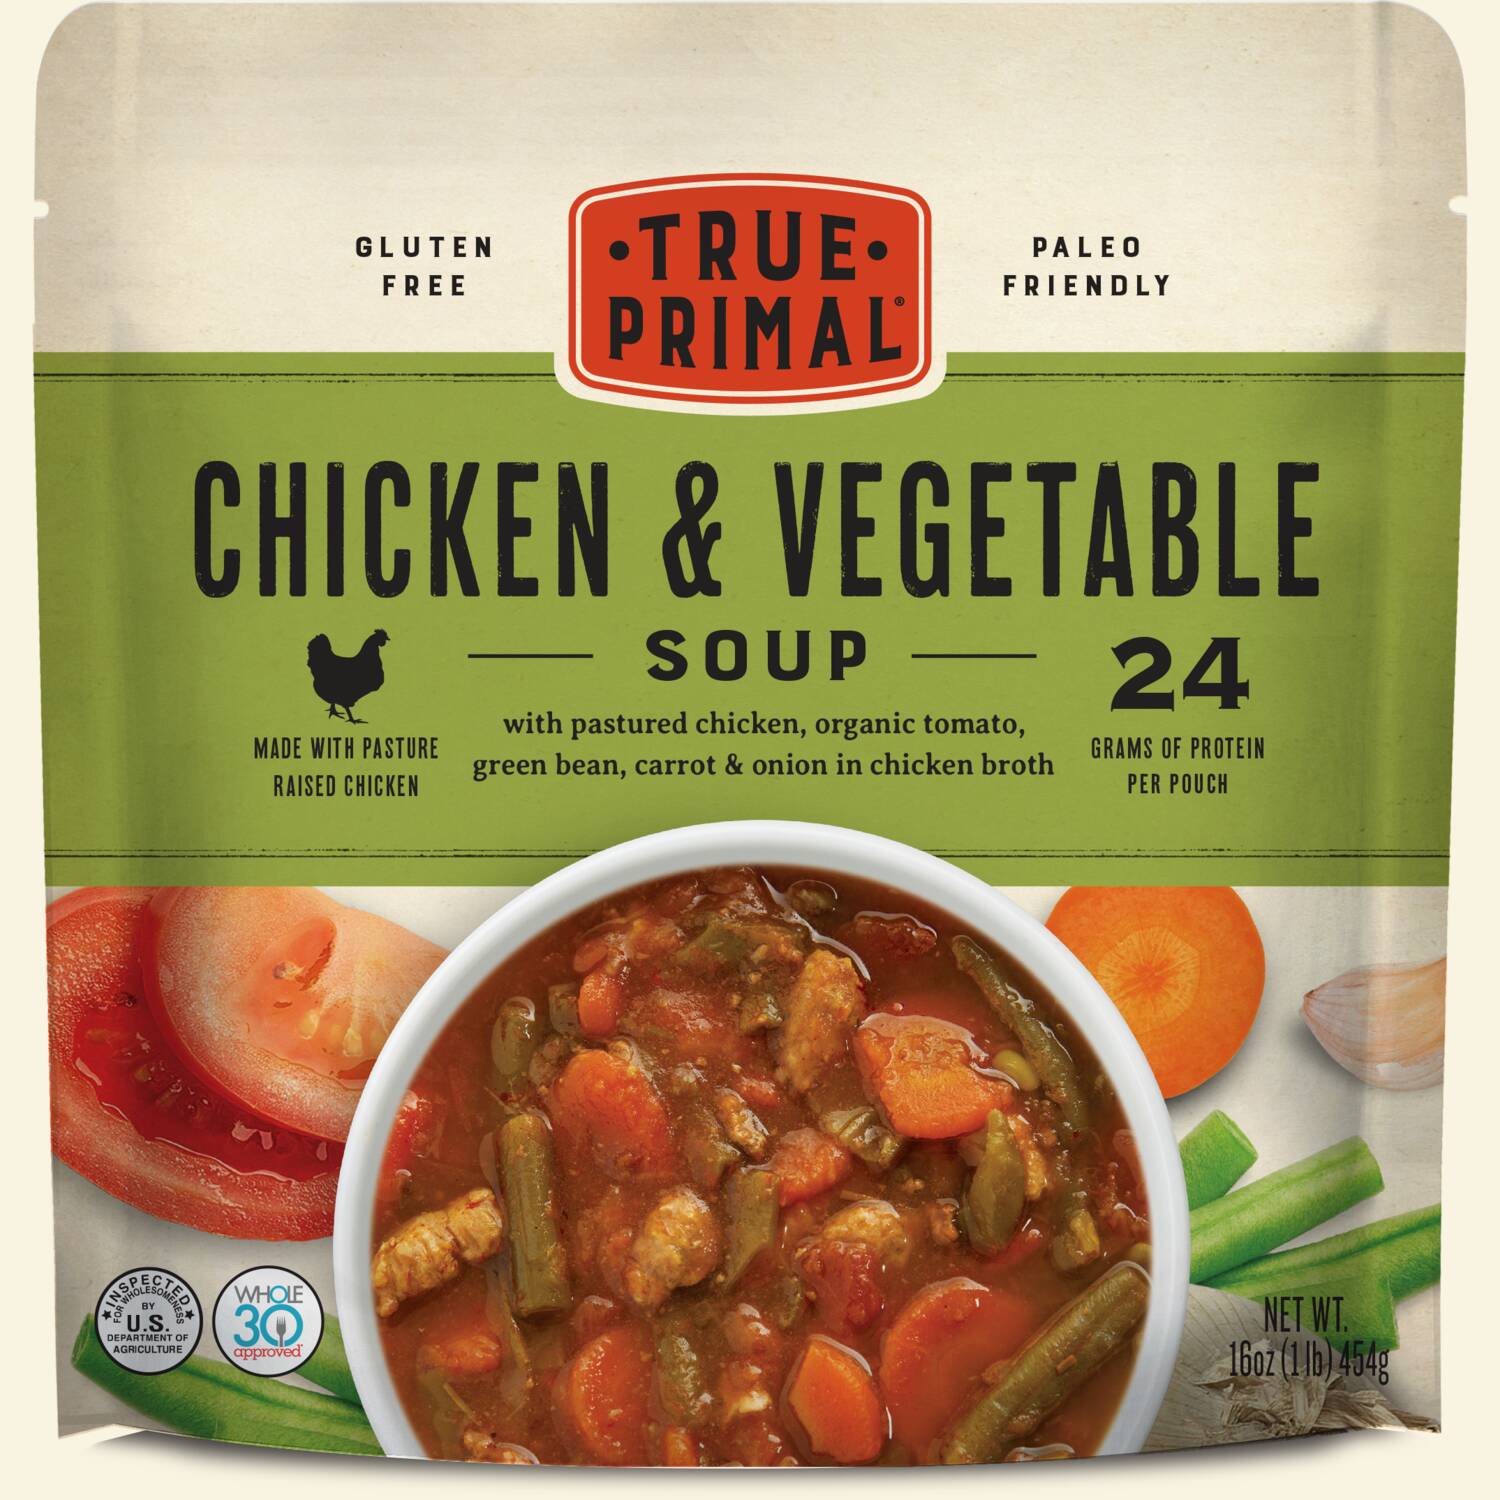 True Primal Chicken & Vegetable Soup in pouch, front